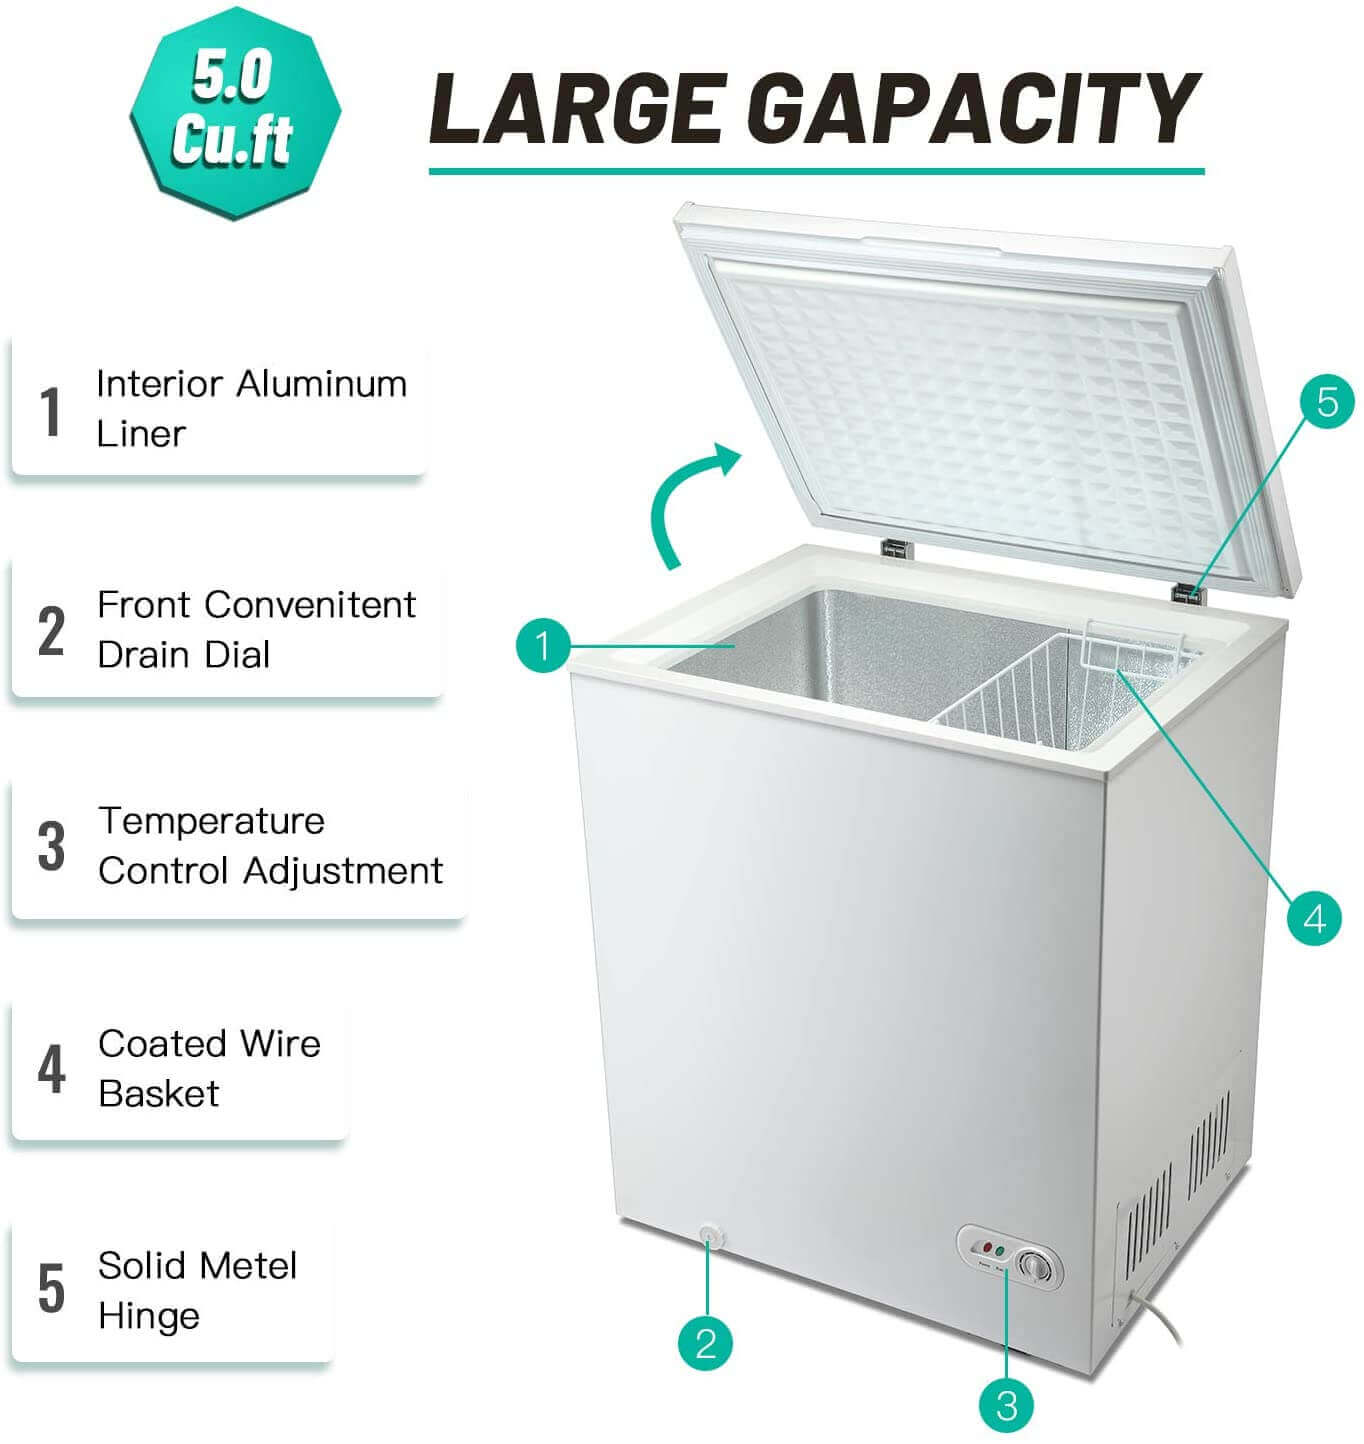 Antarctic Star 3.5 Cu.ft Chest FreezerWith Removable Basket Free Stand –  ANTARCTIC-STAR